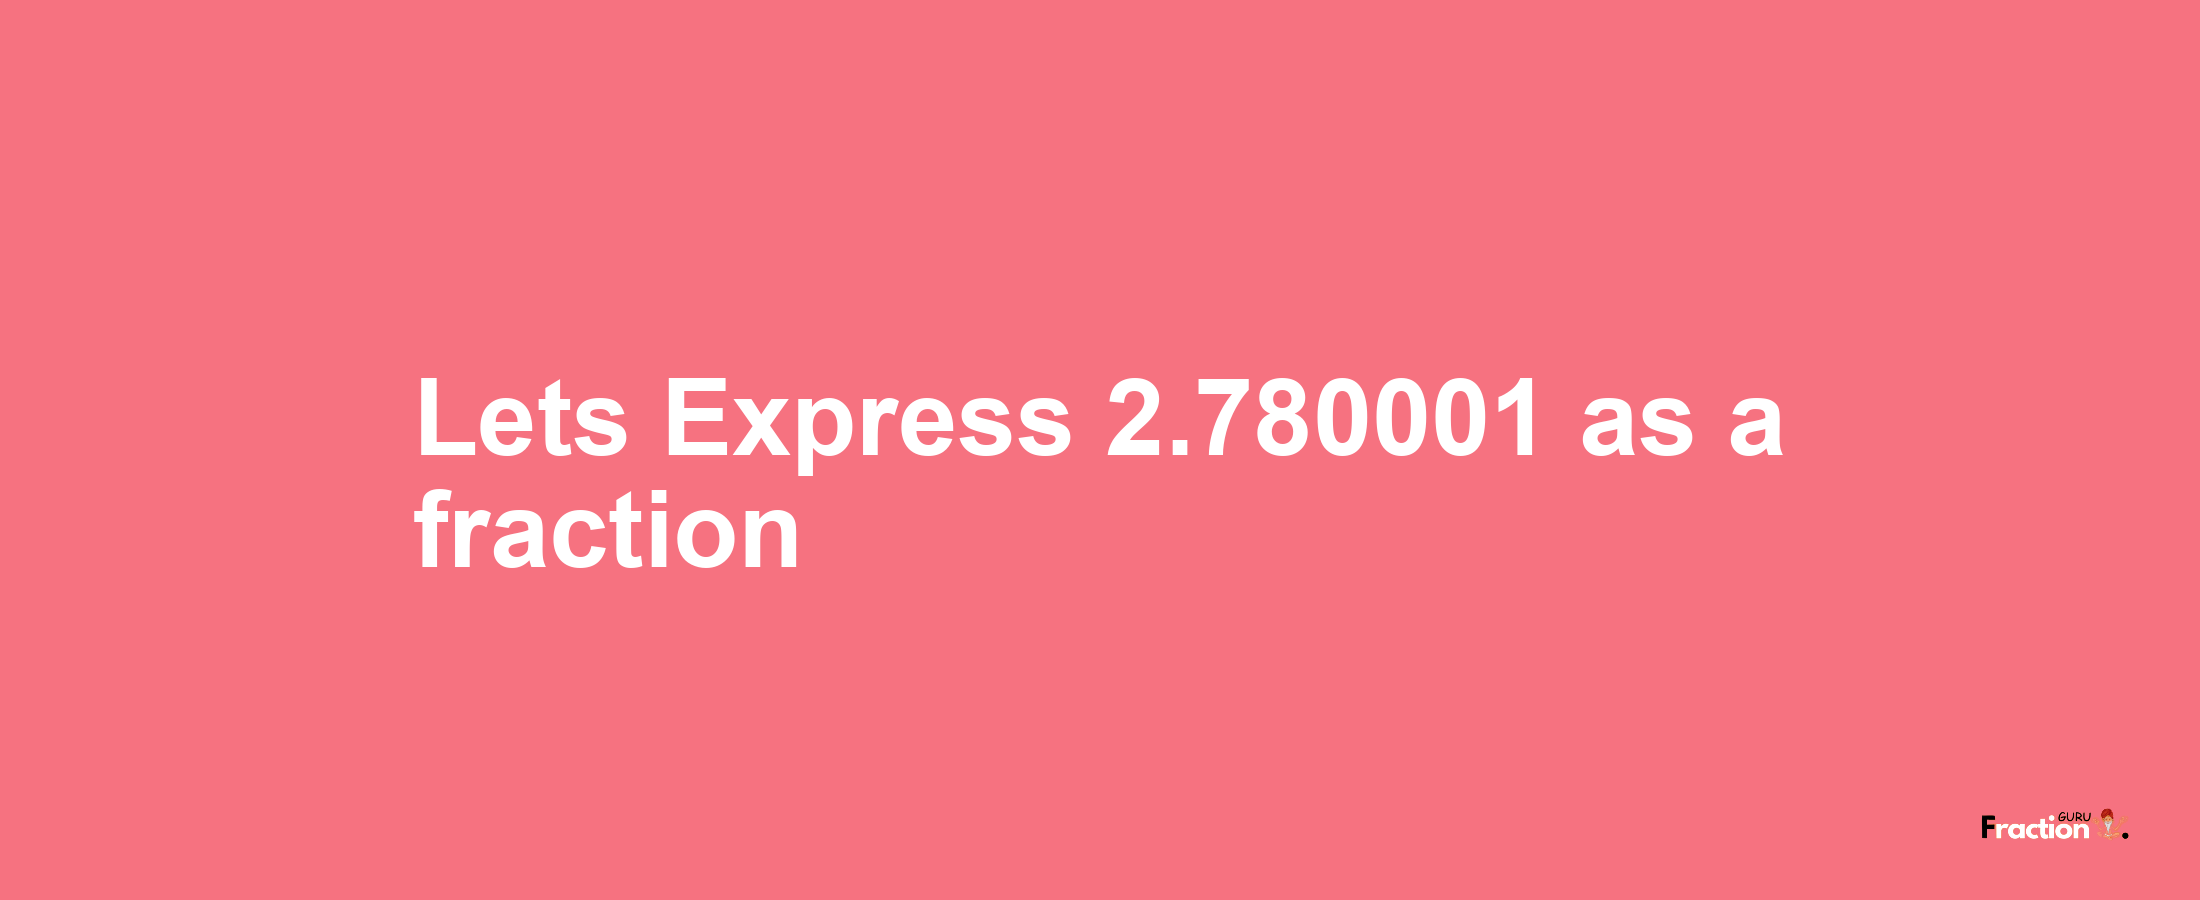 Lets Express 2.780001 as afraction